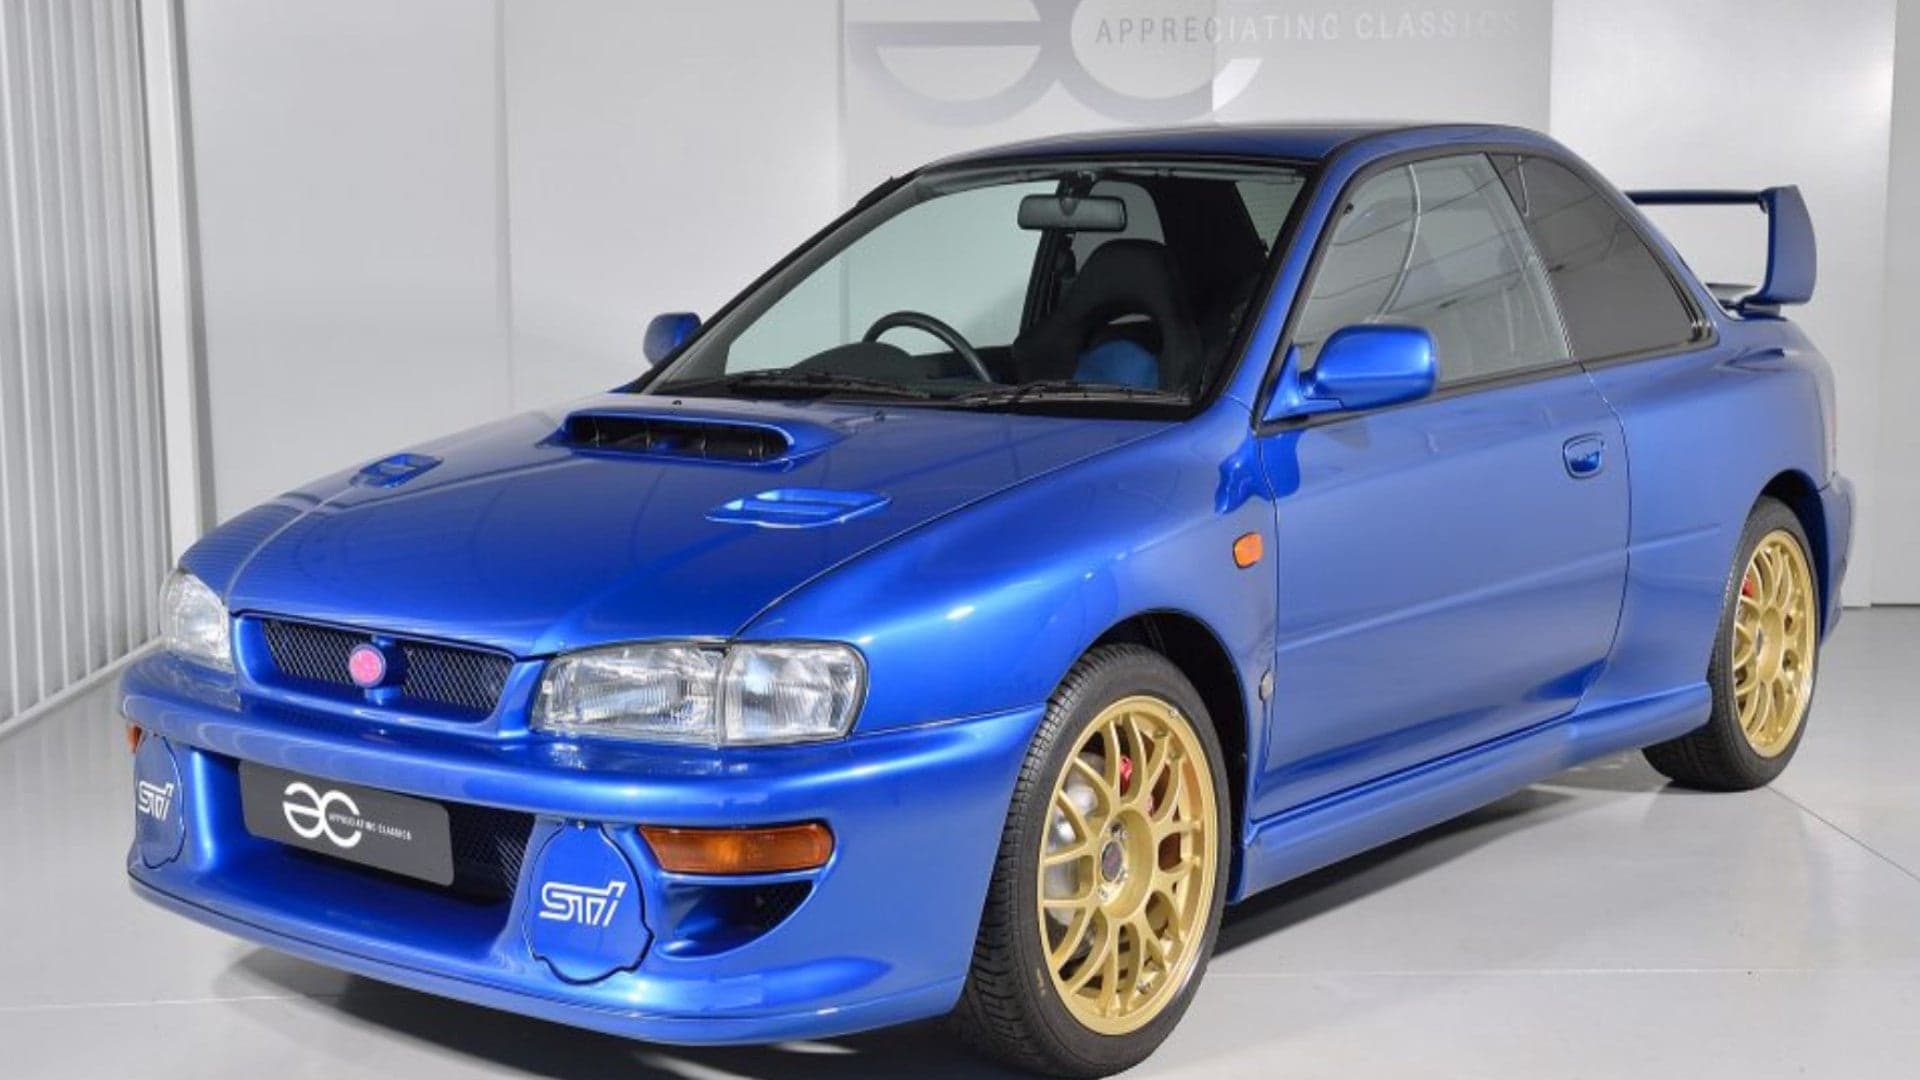 The Cleanest, Most Expensive Subaru Impreza 22B That America Still Can’t Import Goes For $370,000